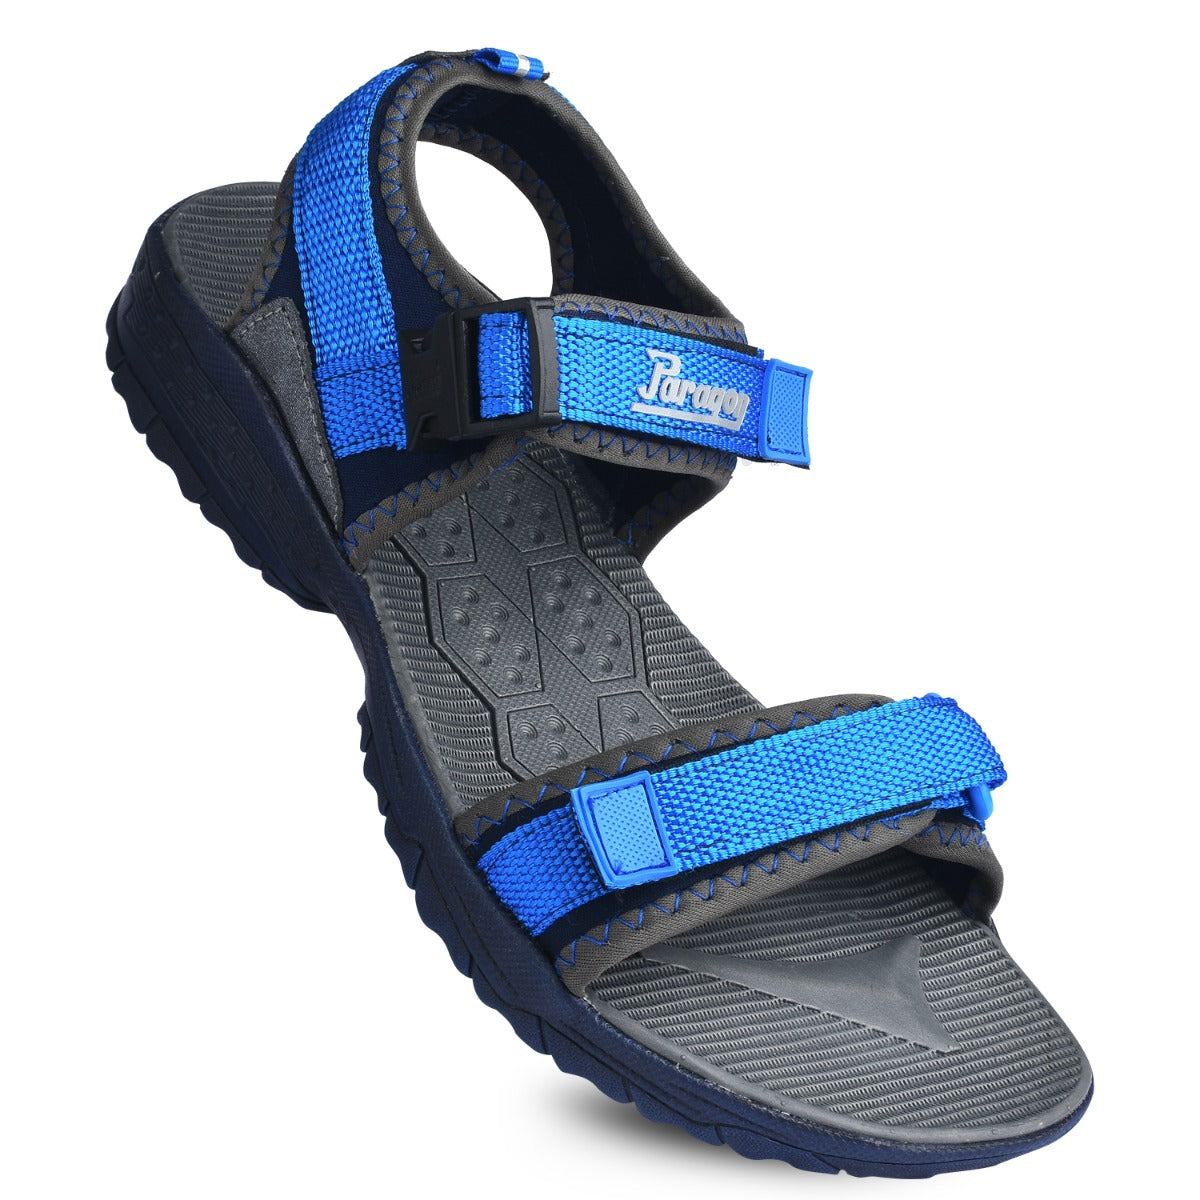 Paragon Blot FBK1415G Men Stylish Sandals | Comfortable Sandals for Daily Outdoor Use | Casual Formal Sandals with Cushioned Soles